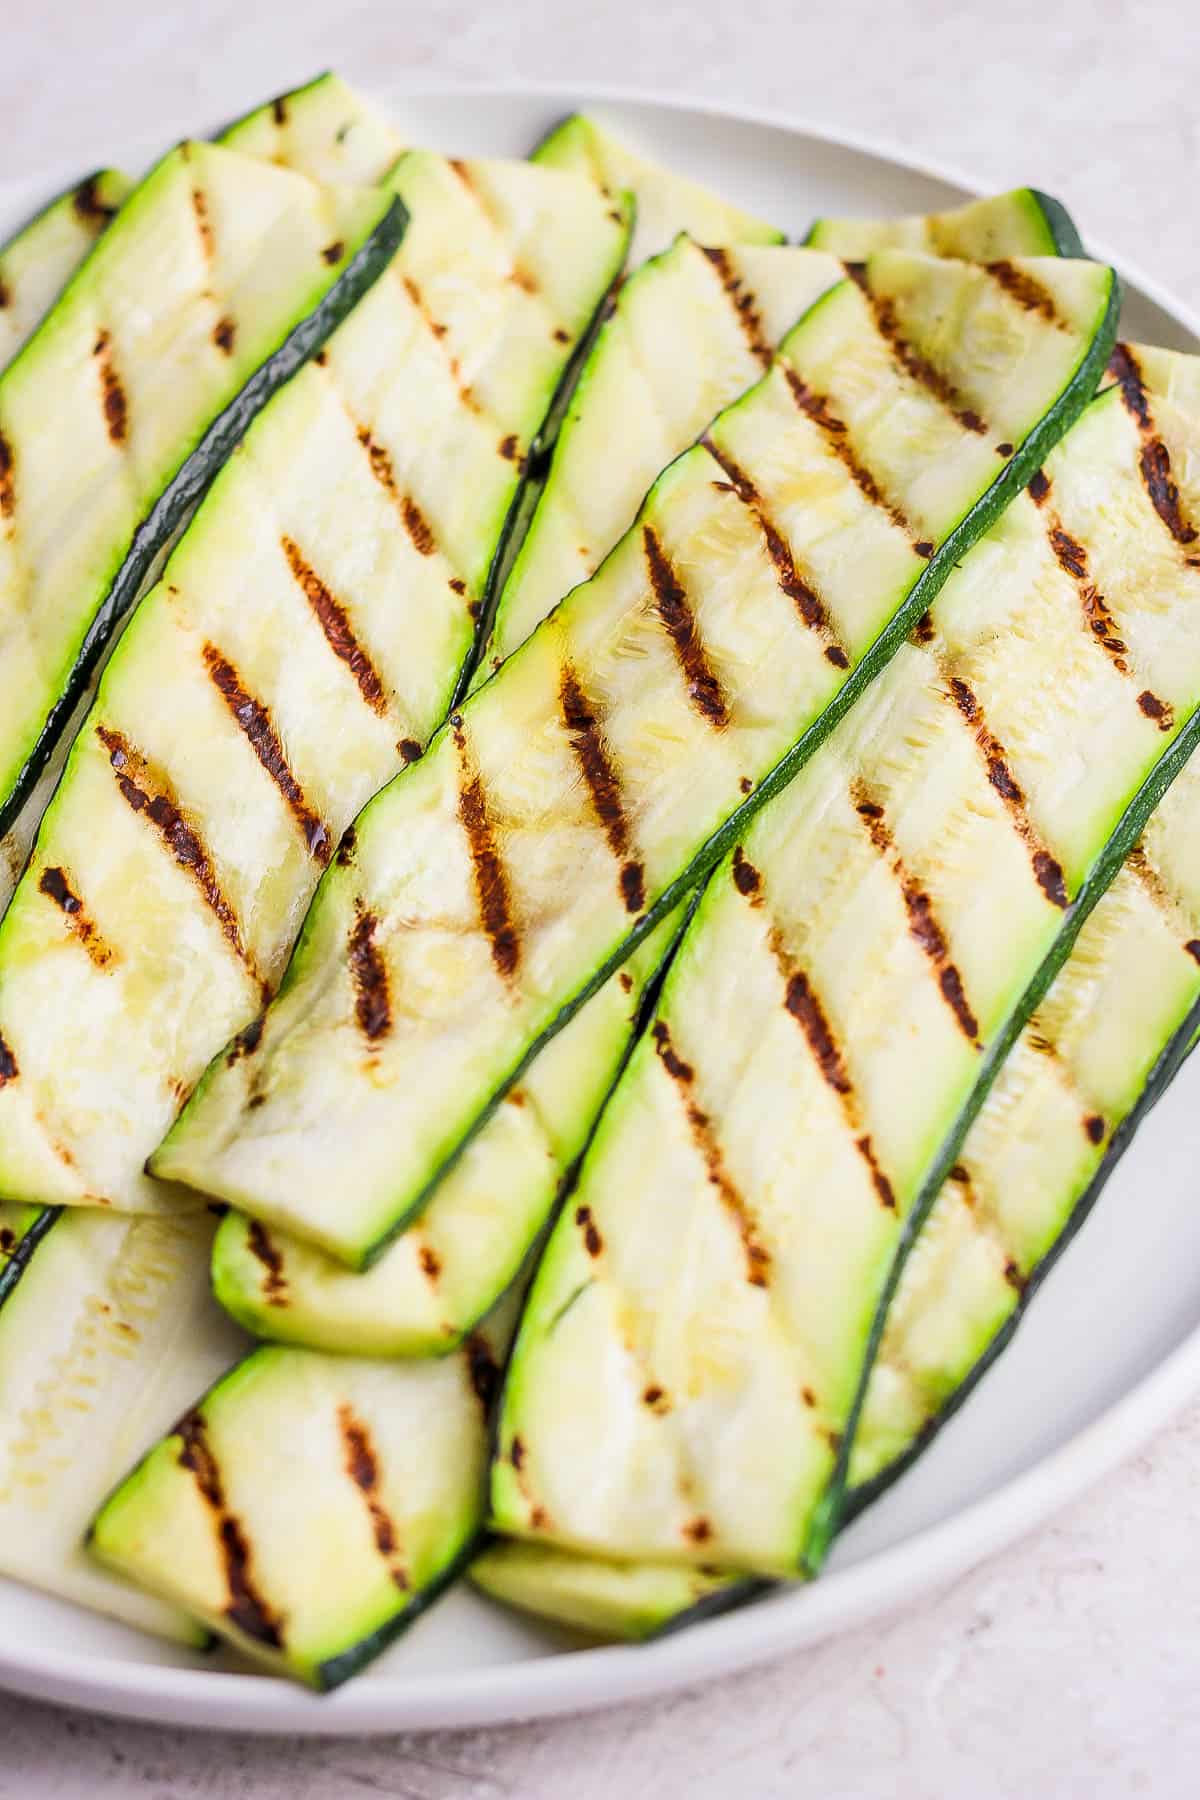 Grilled zucchini piled on a plate.